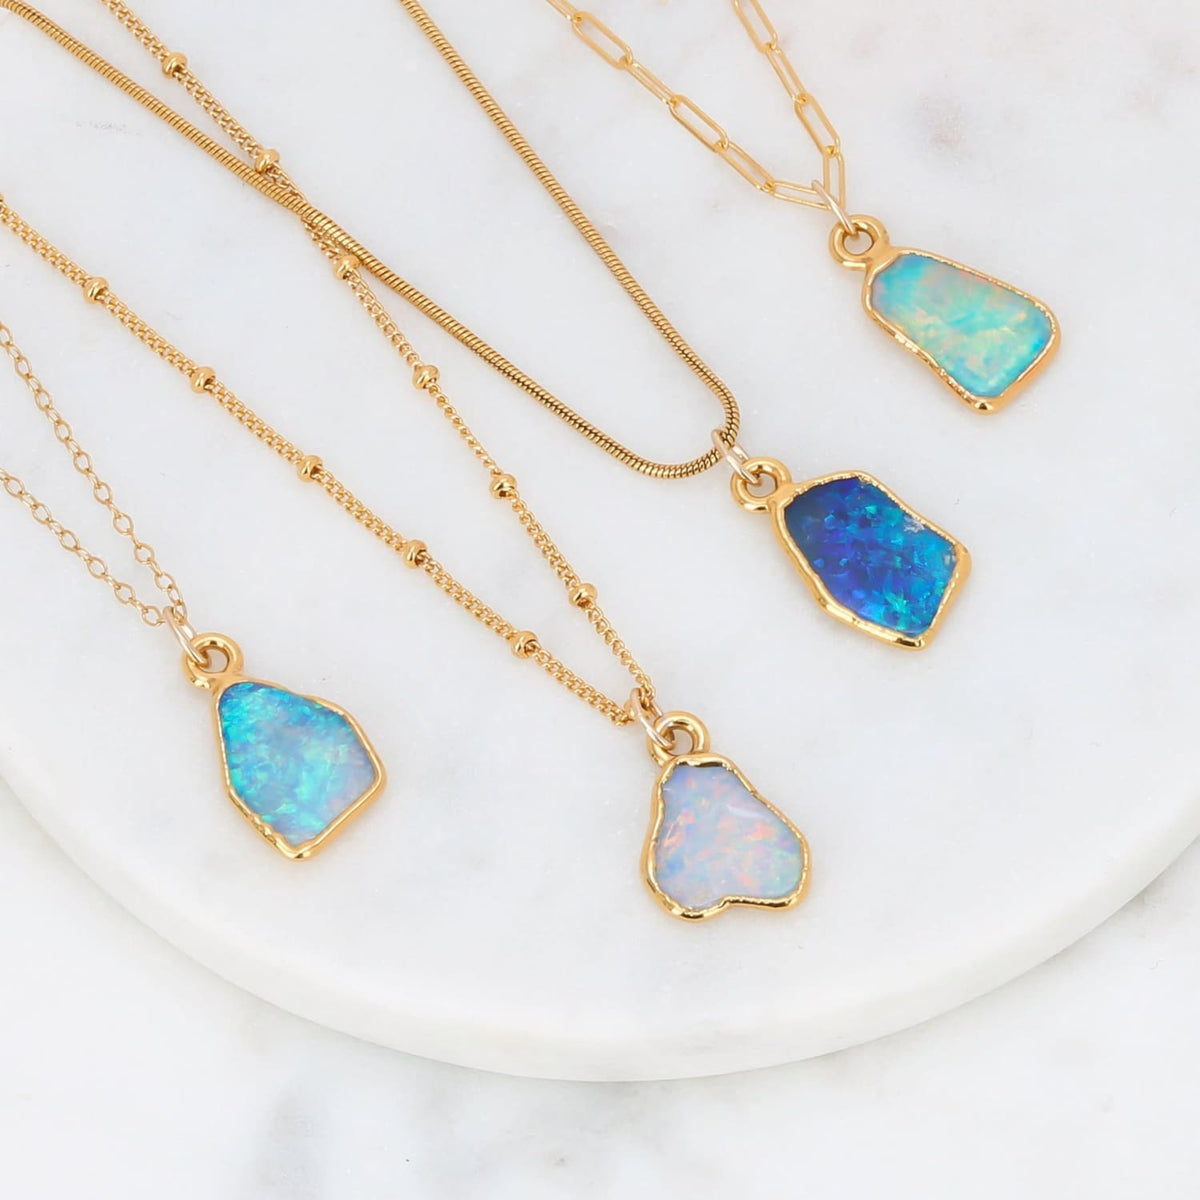 Australian Opal Pendant | Handcrafted from AHW Studio